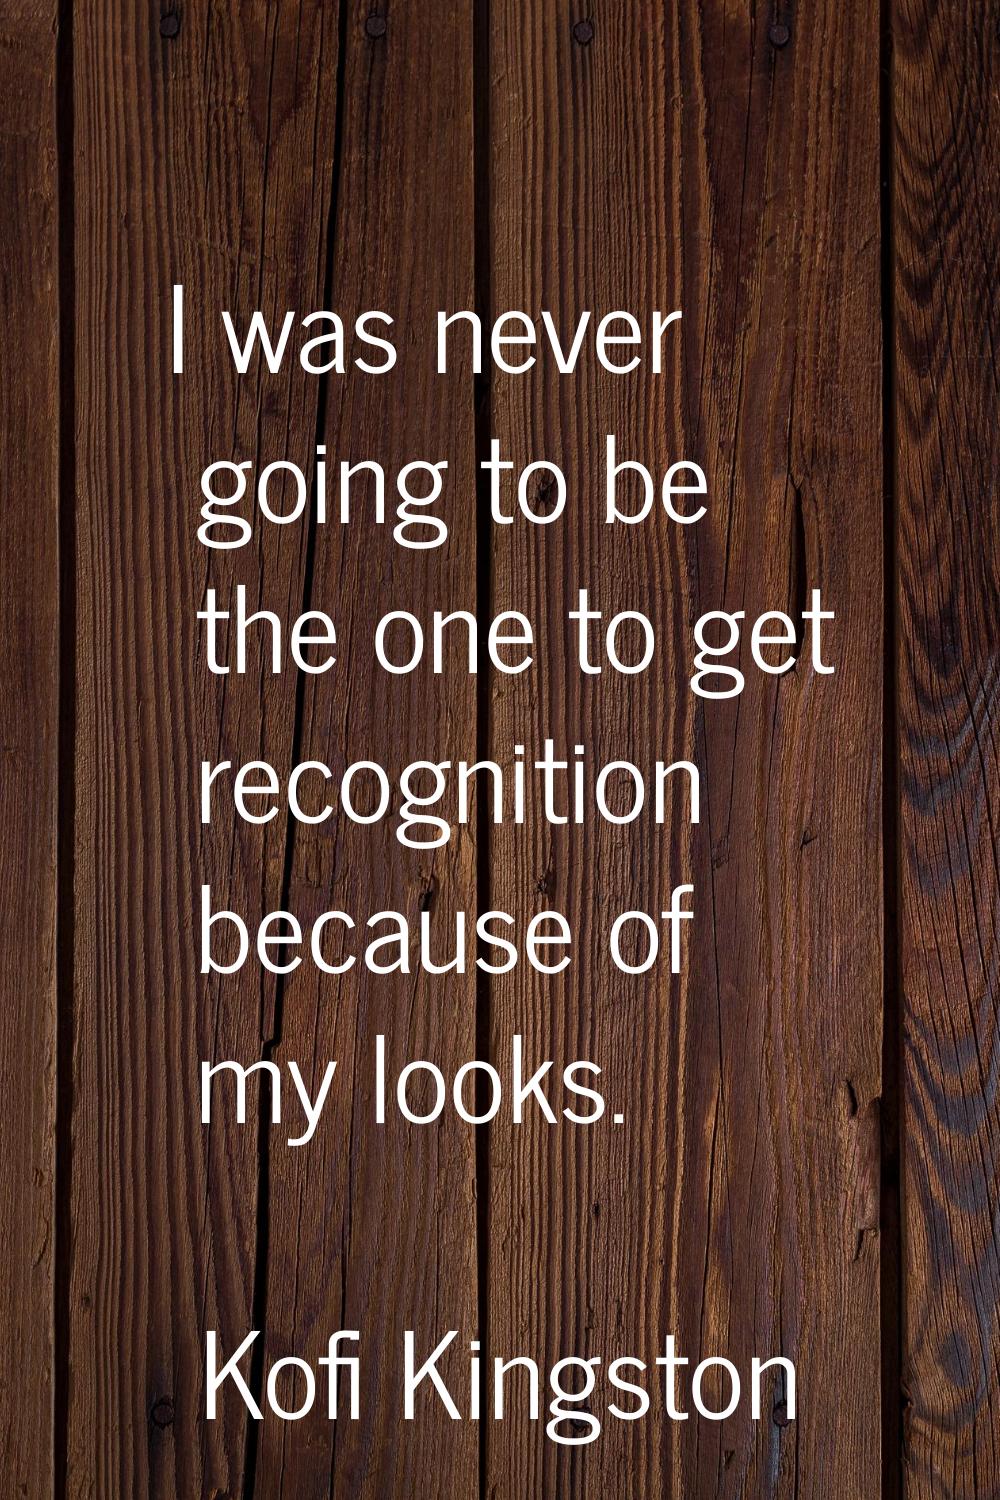 I was never going to be the one to get recognition because of my looks.